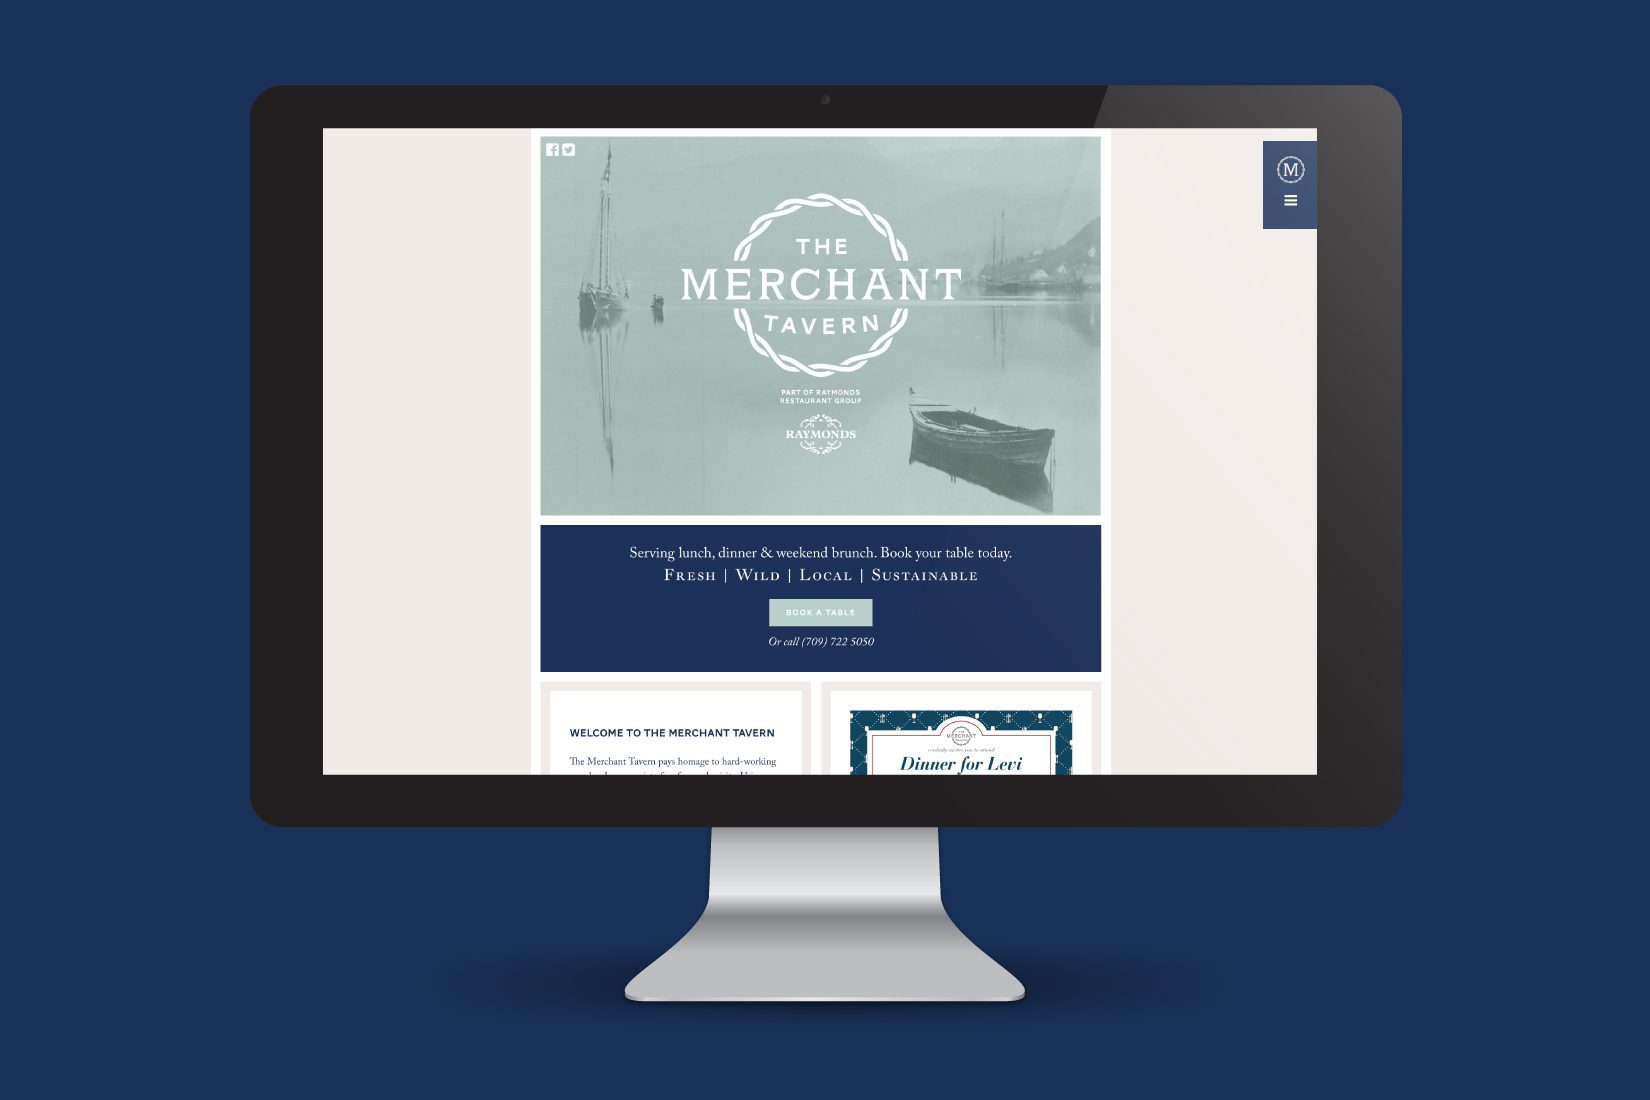 An iMac displaying the homepage of the The Merchant Taven website